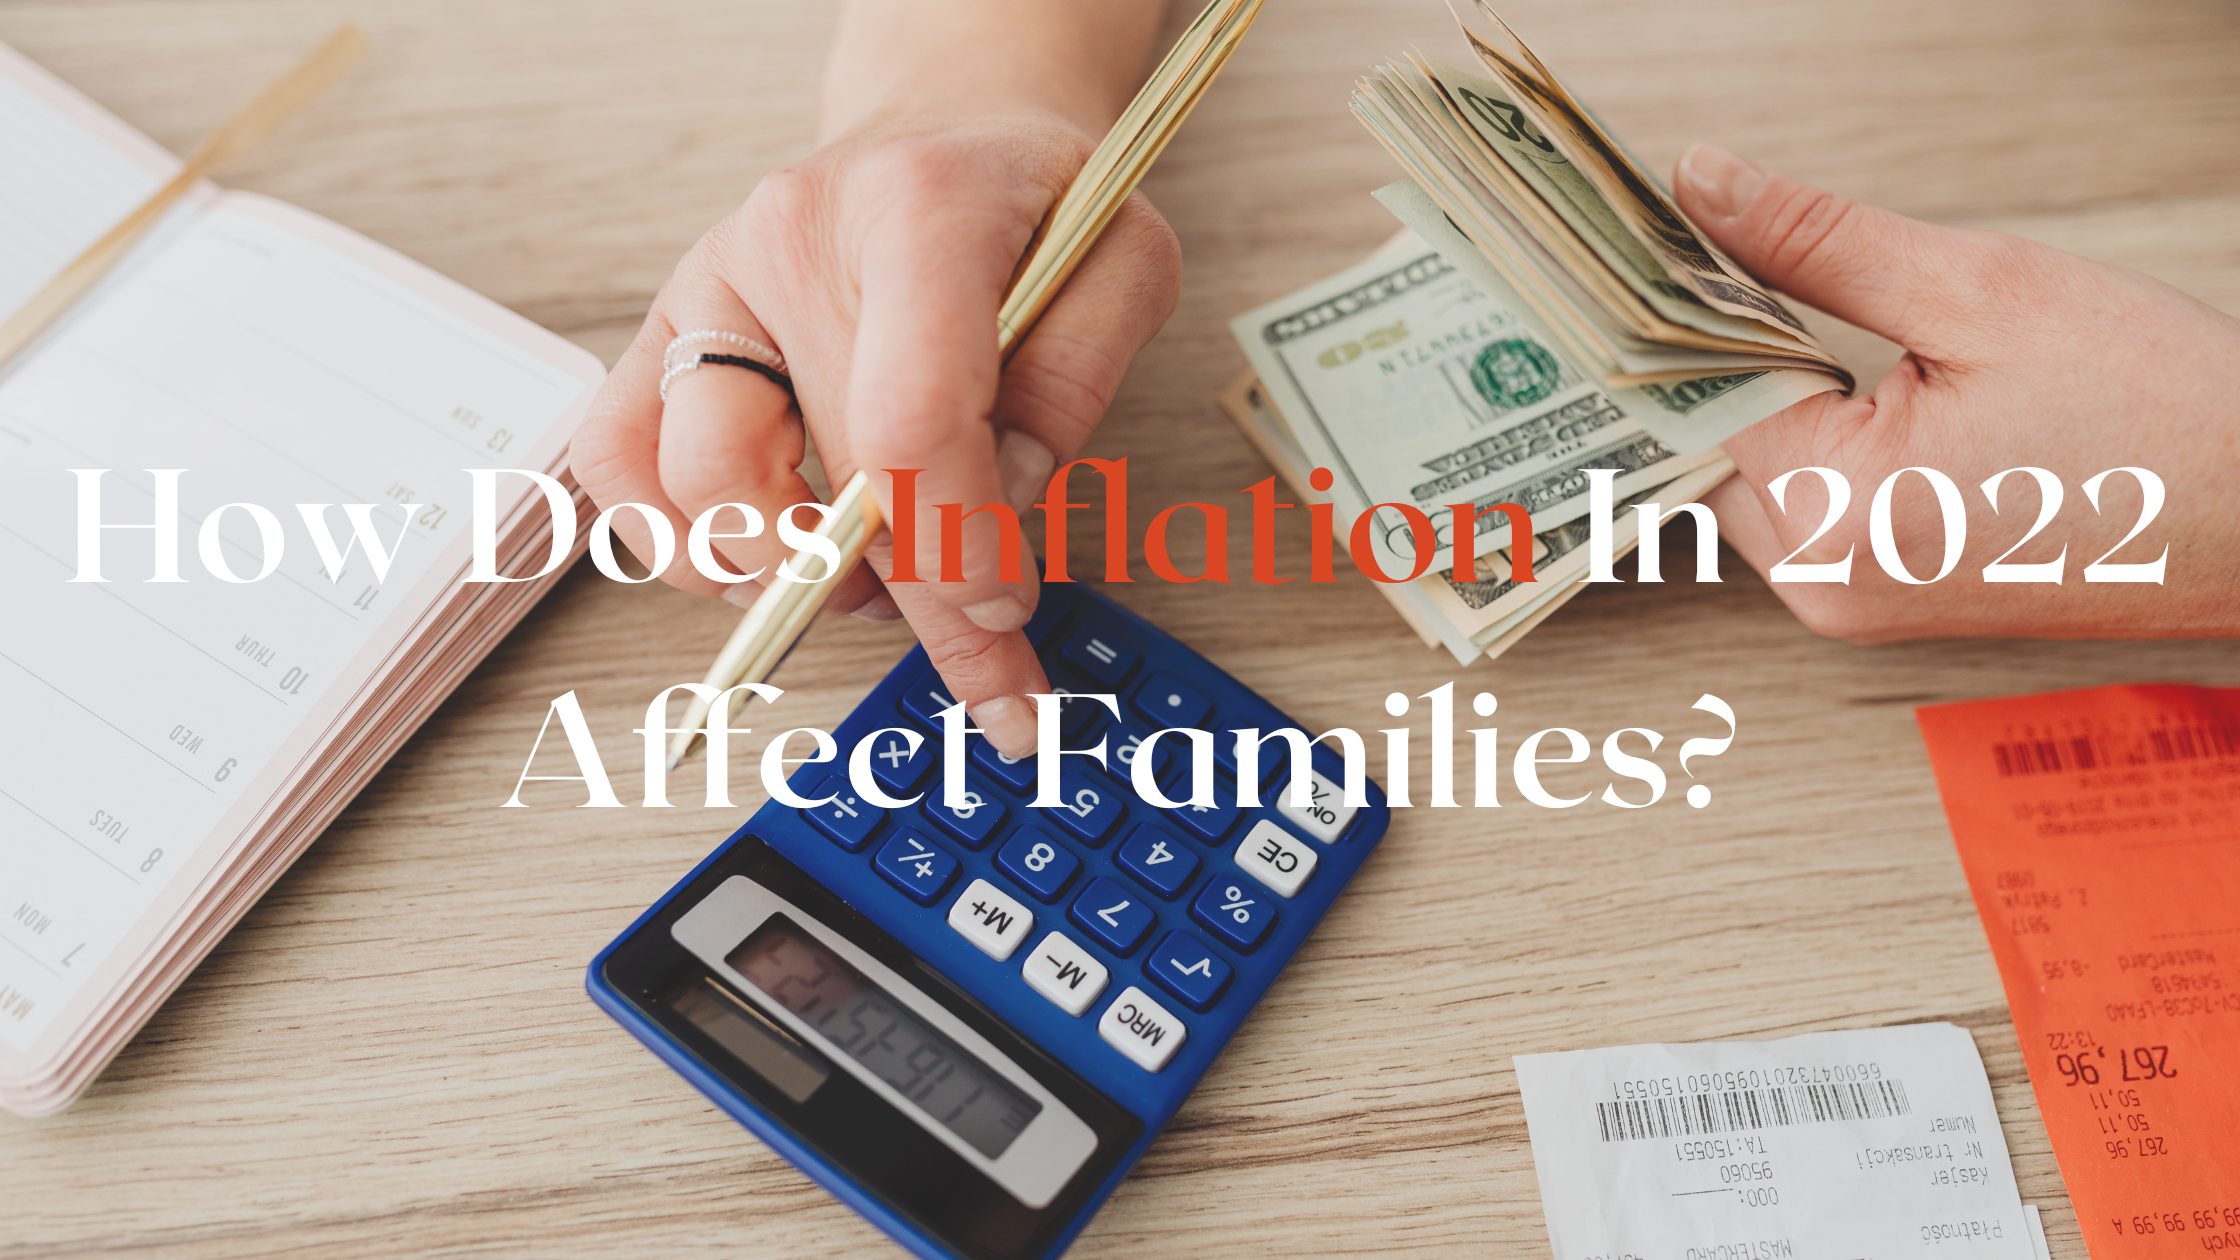 How Does Inflation In 2022 Affect Families?